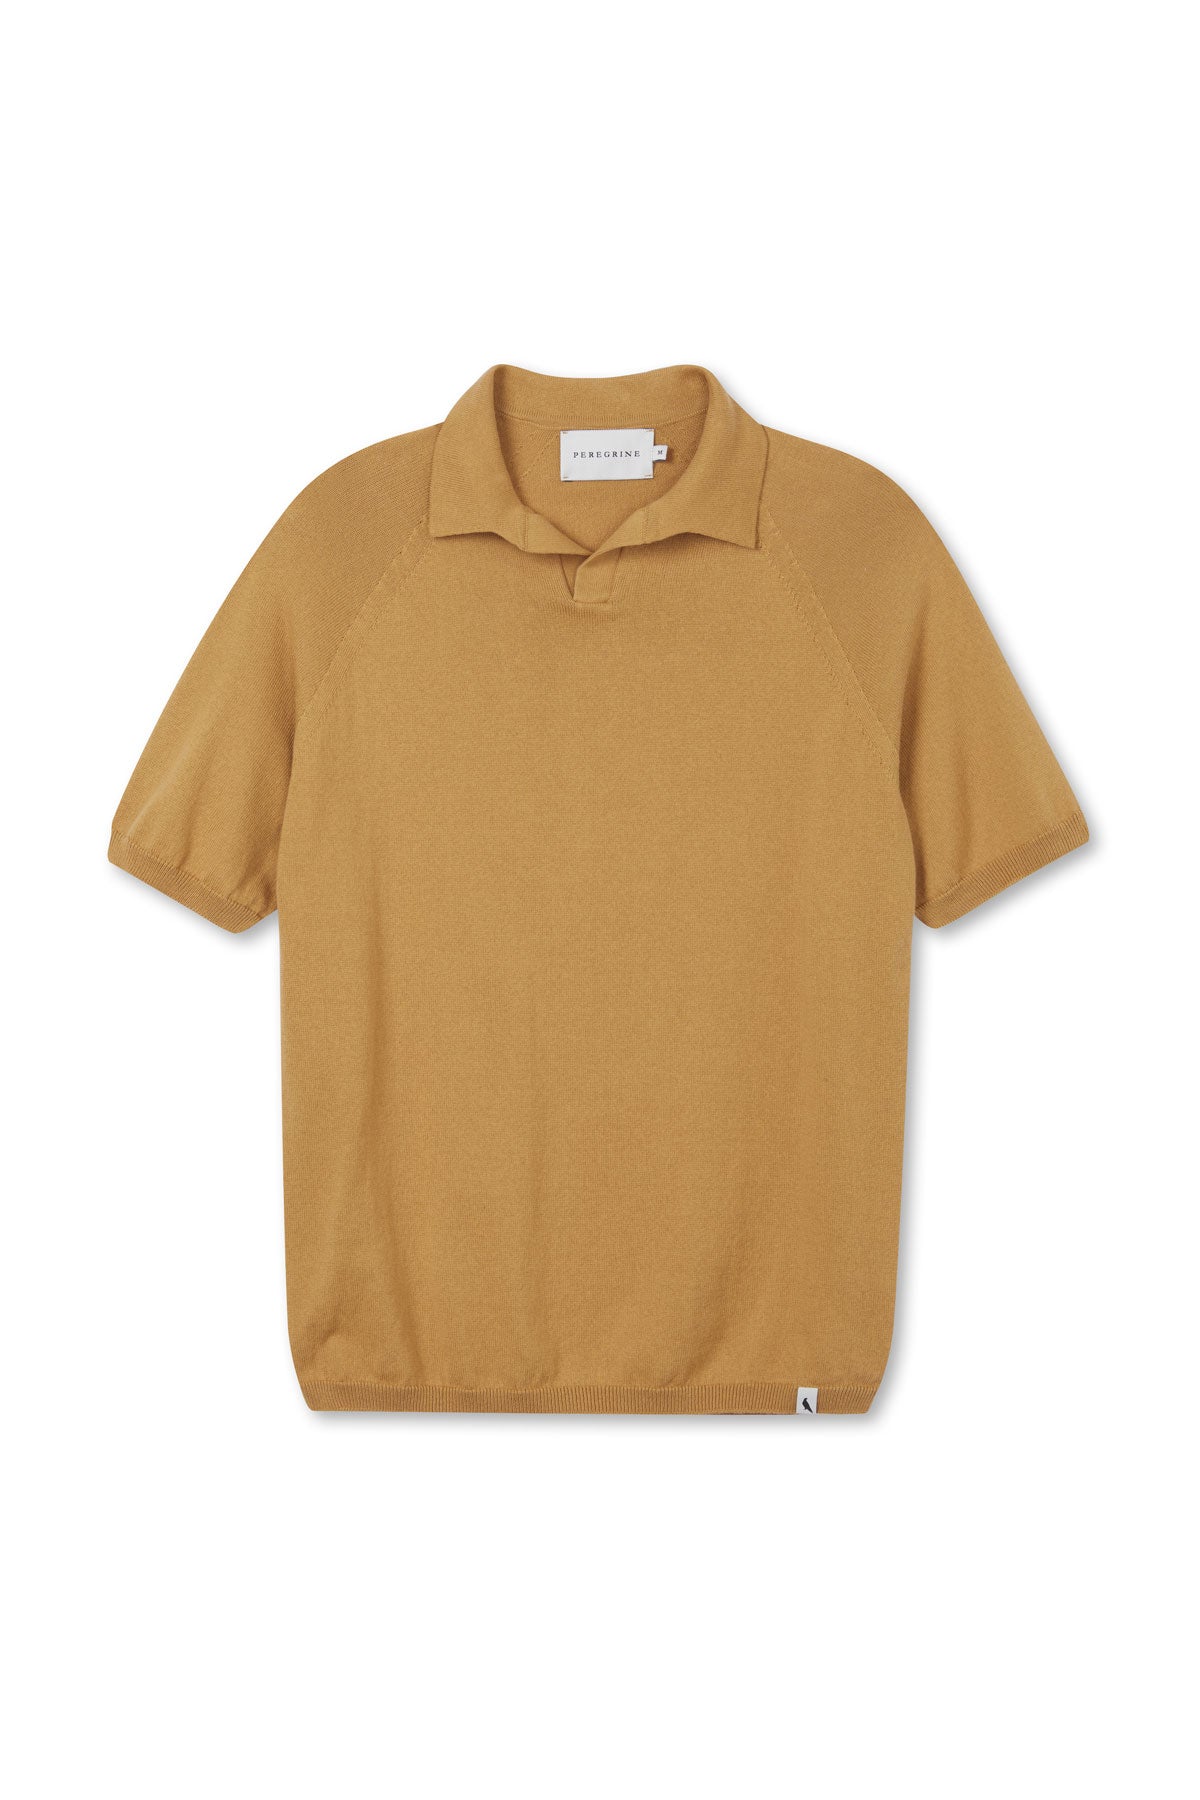 Peregrine - Knitted Emery Polo Shirt in Amber Nilo Organic Cotton